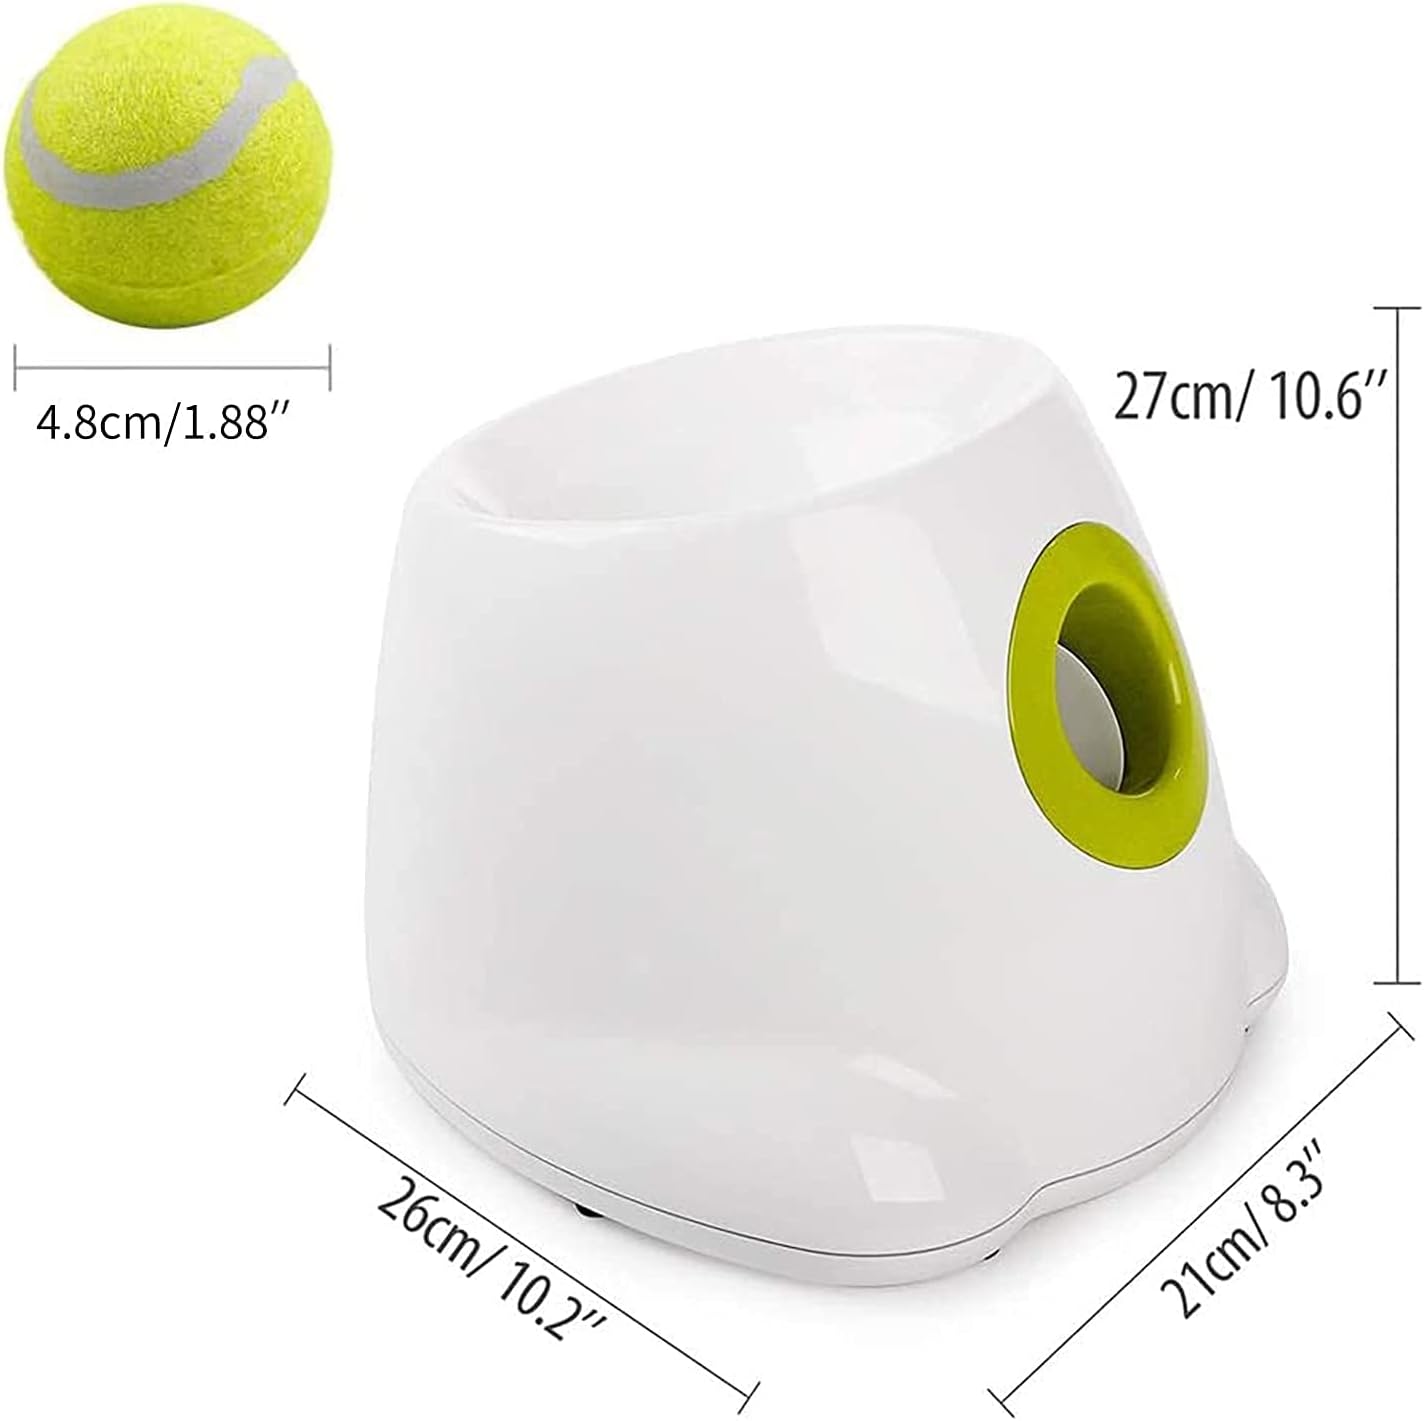 Automatic Dog Ball Launcher with High Pressure